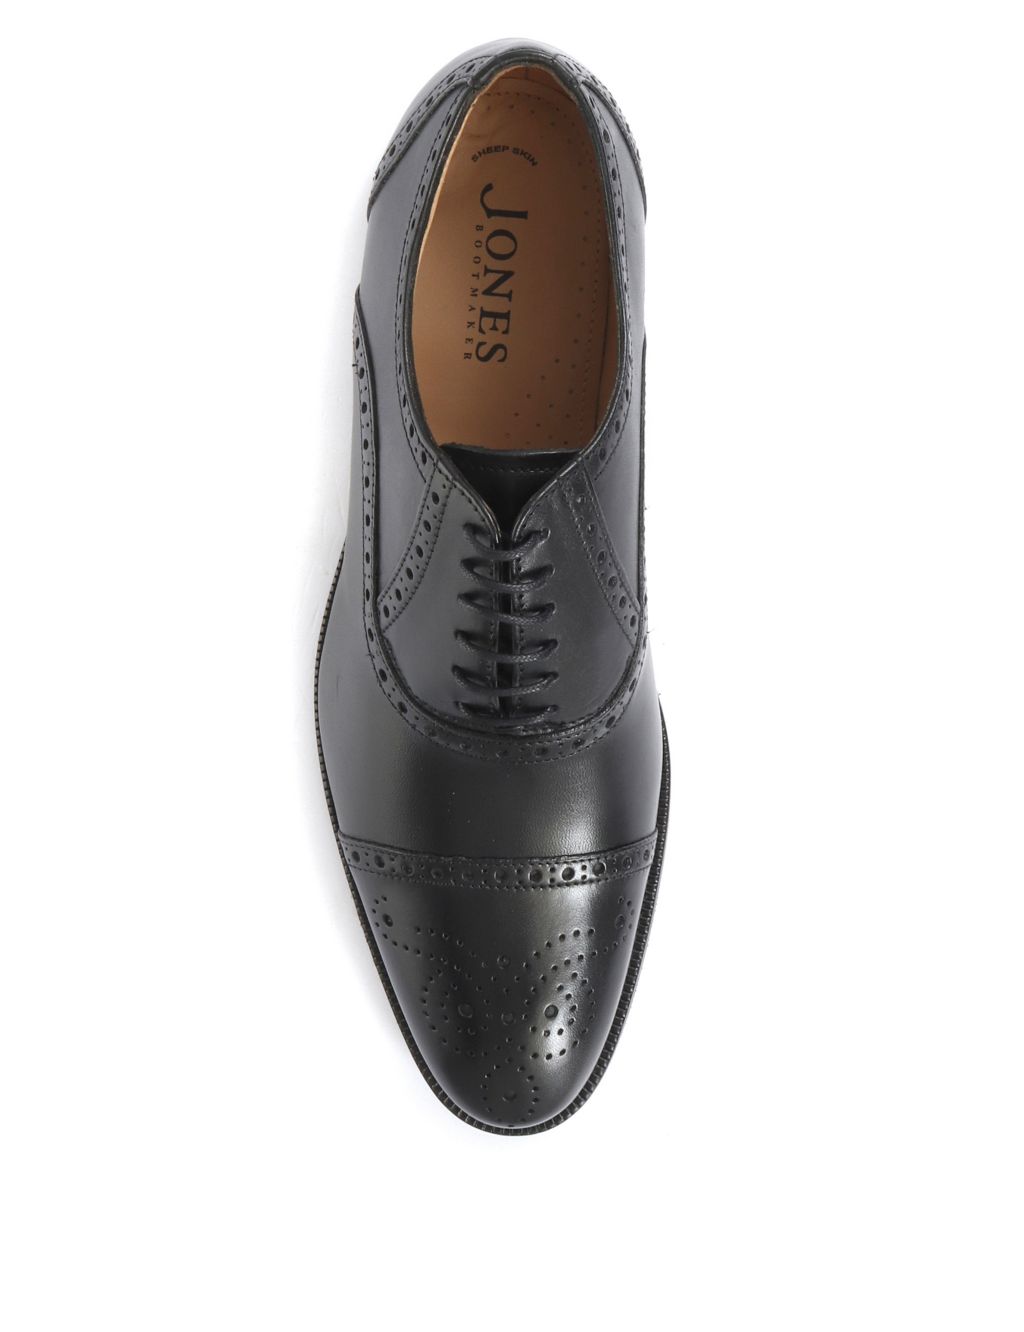 Leather Brogues image 4